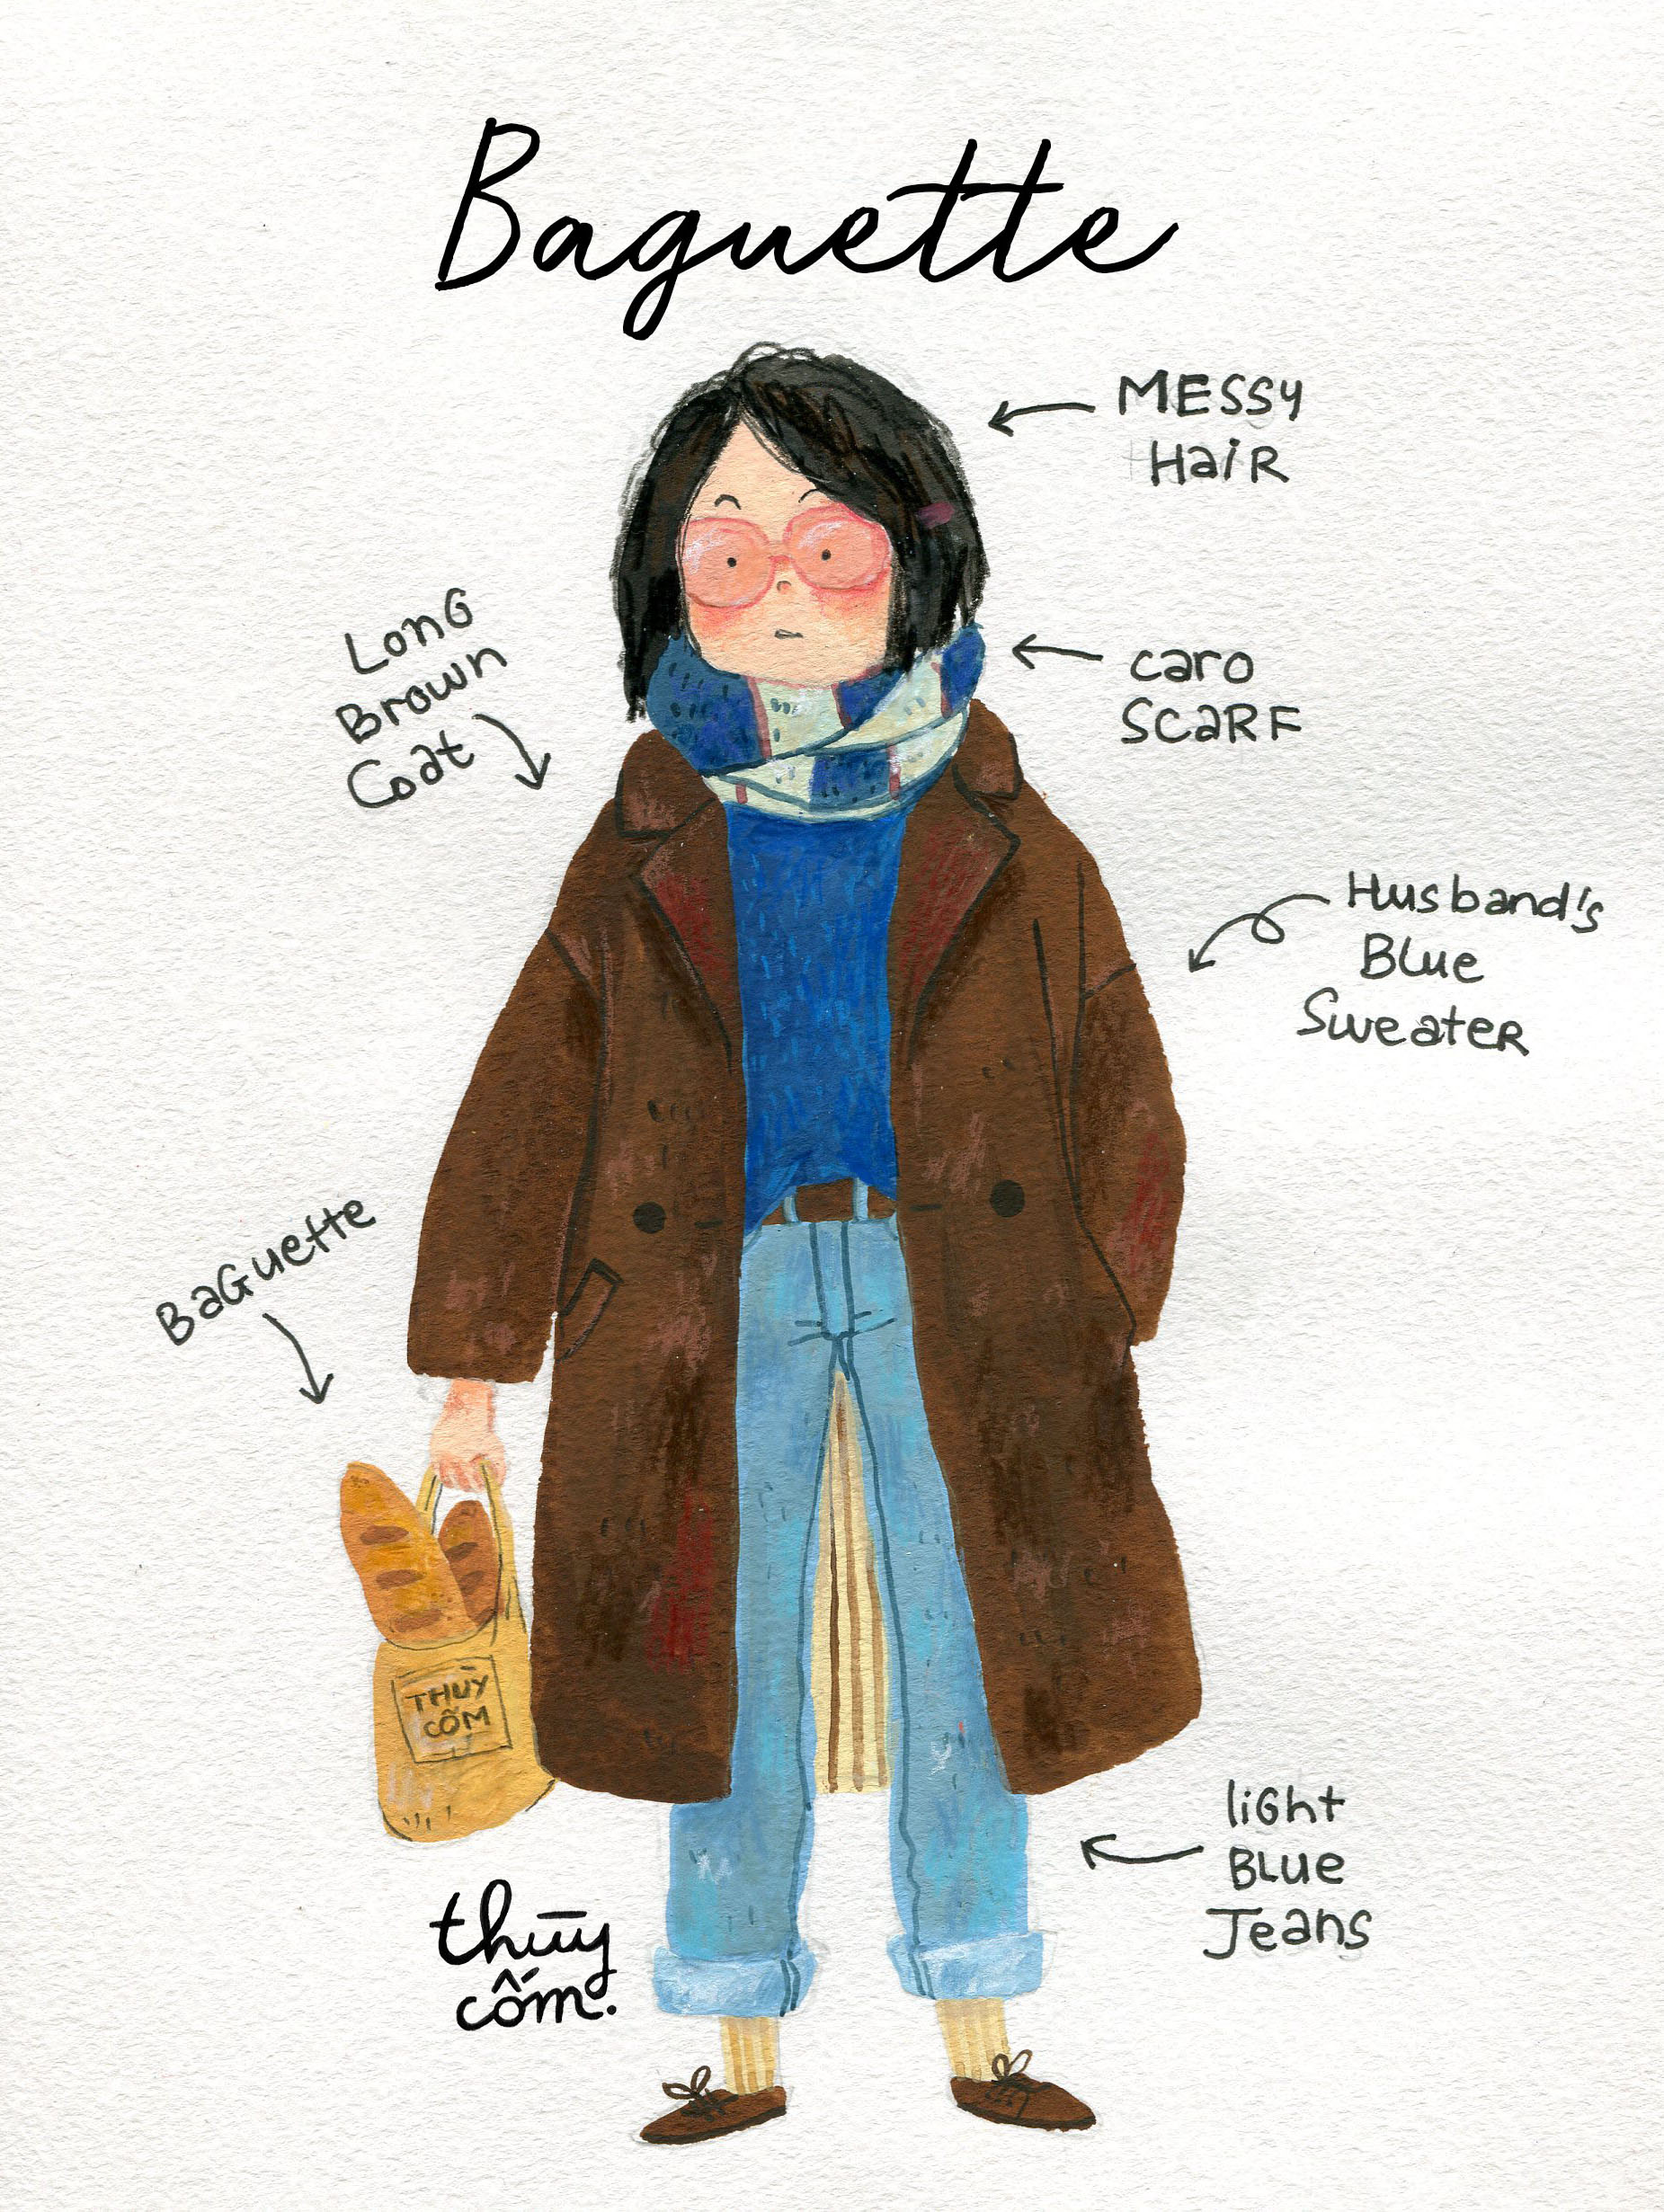 Some of my ootd | gouache and colored pencils